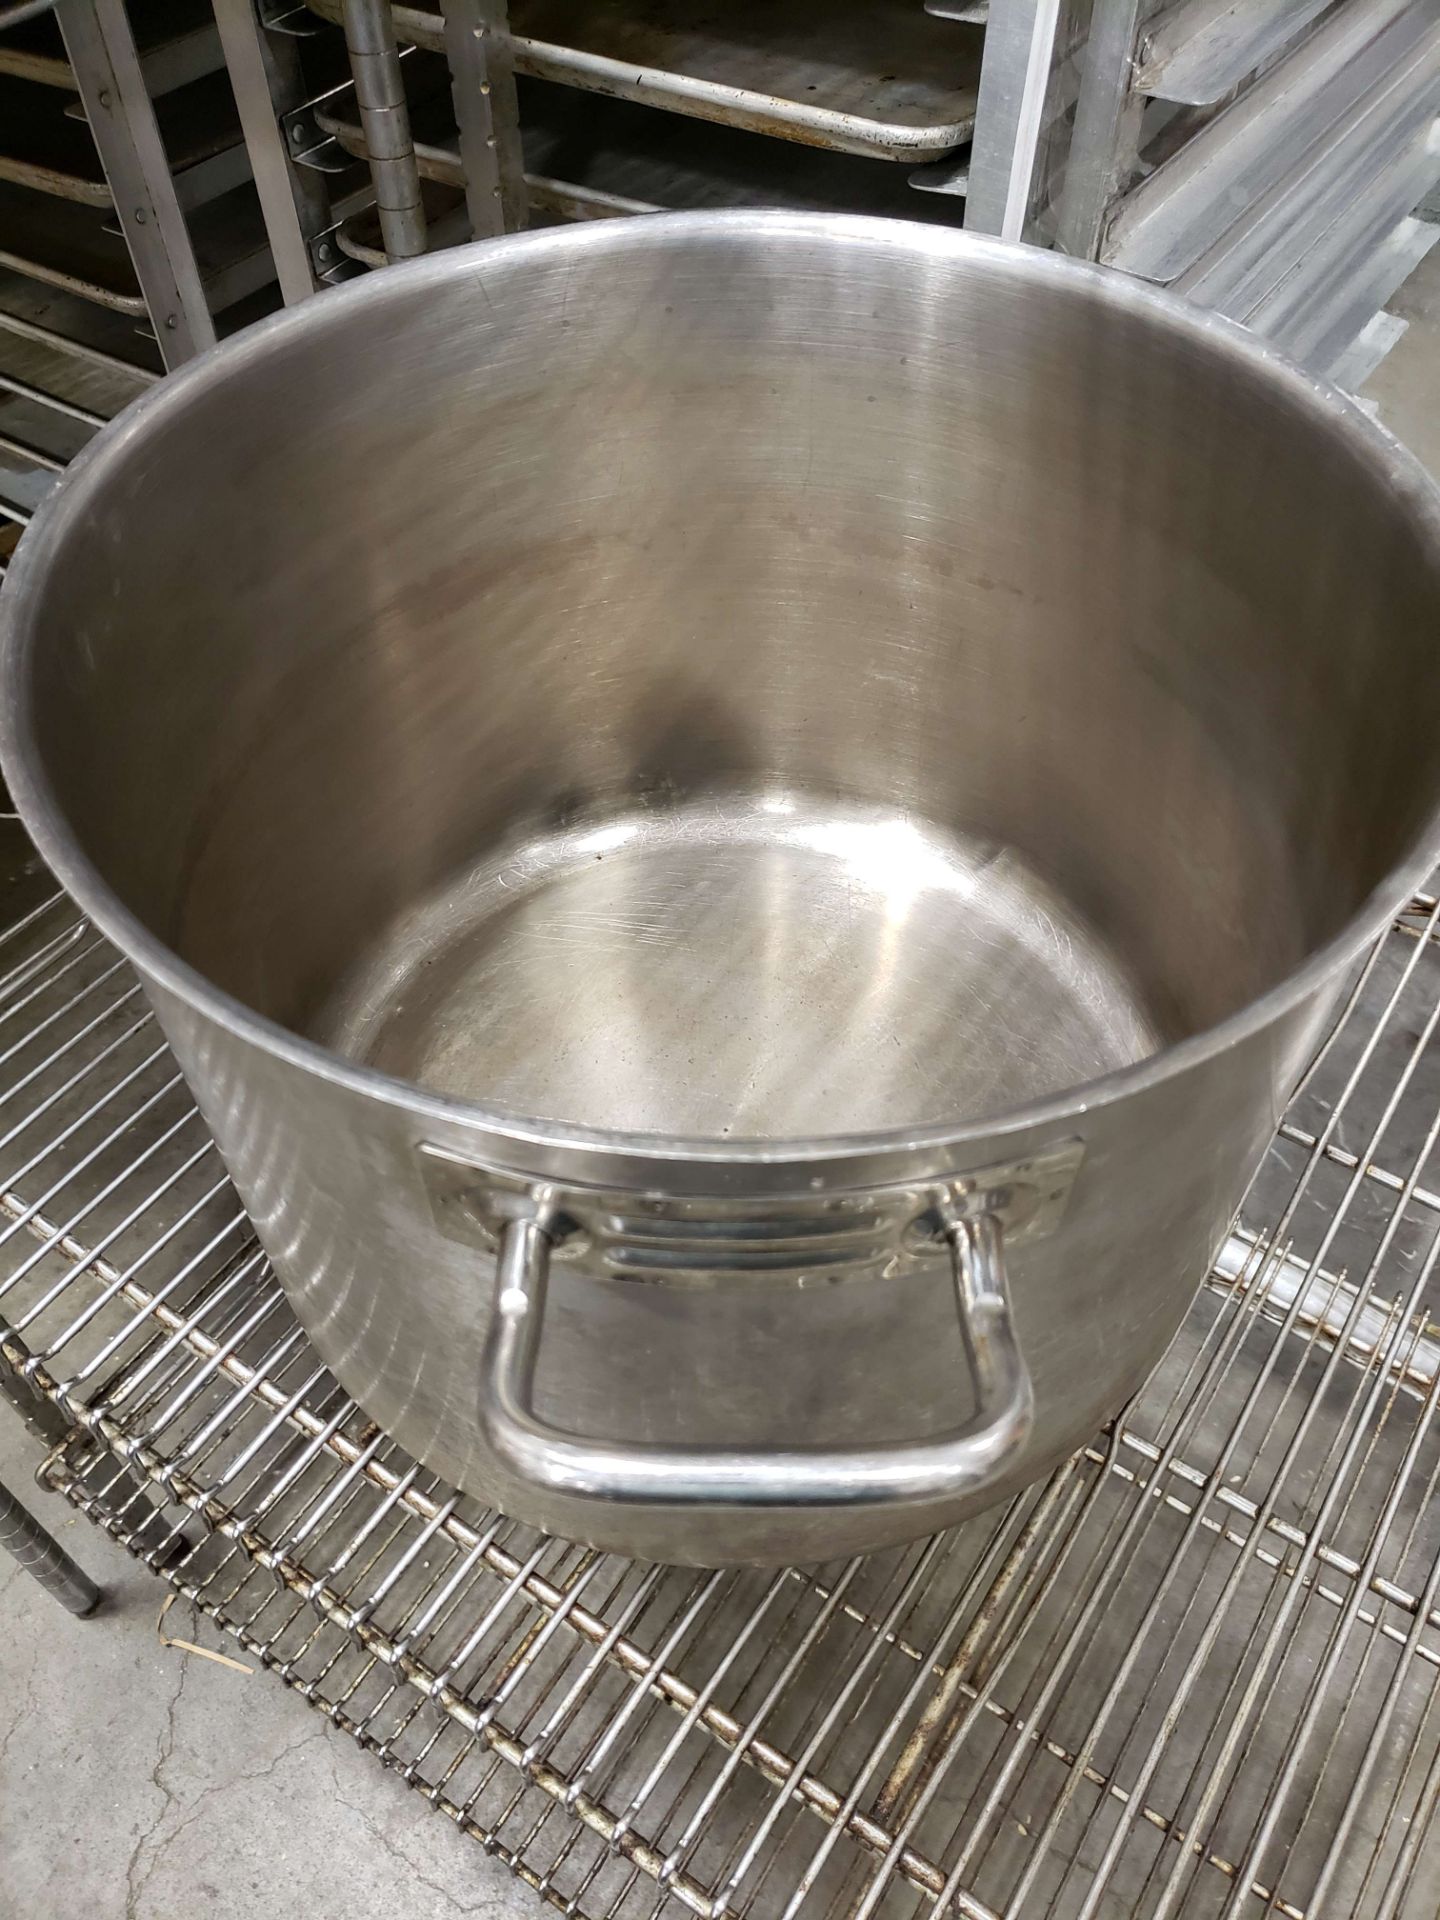 Stainless Stock Pot - Appears to be 32 QT - Image 2 of 2